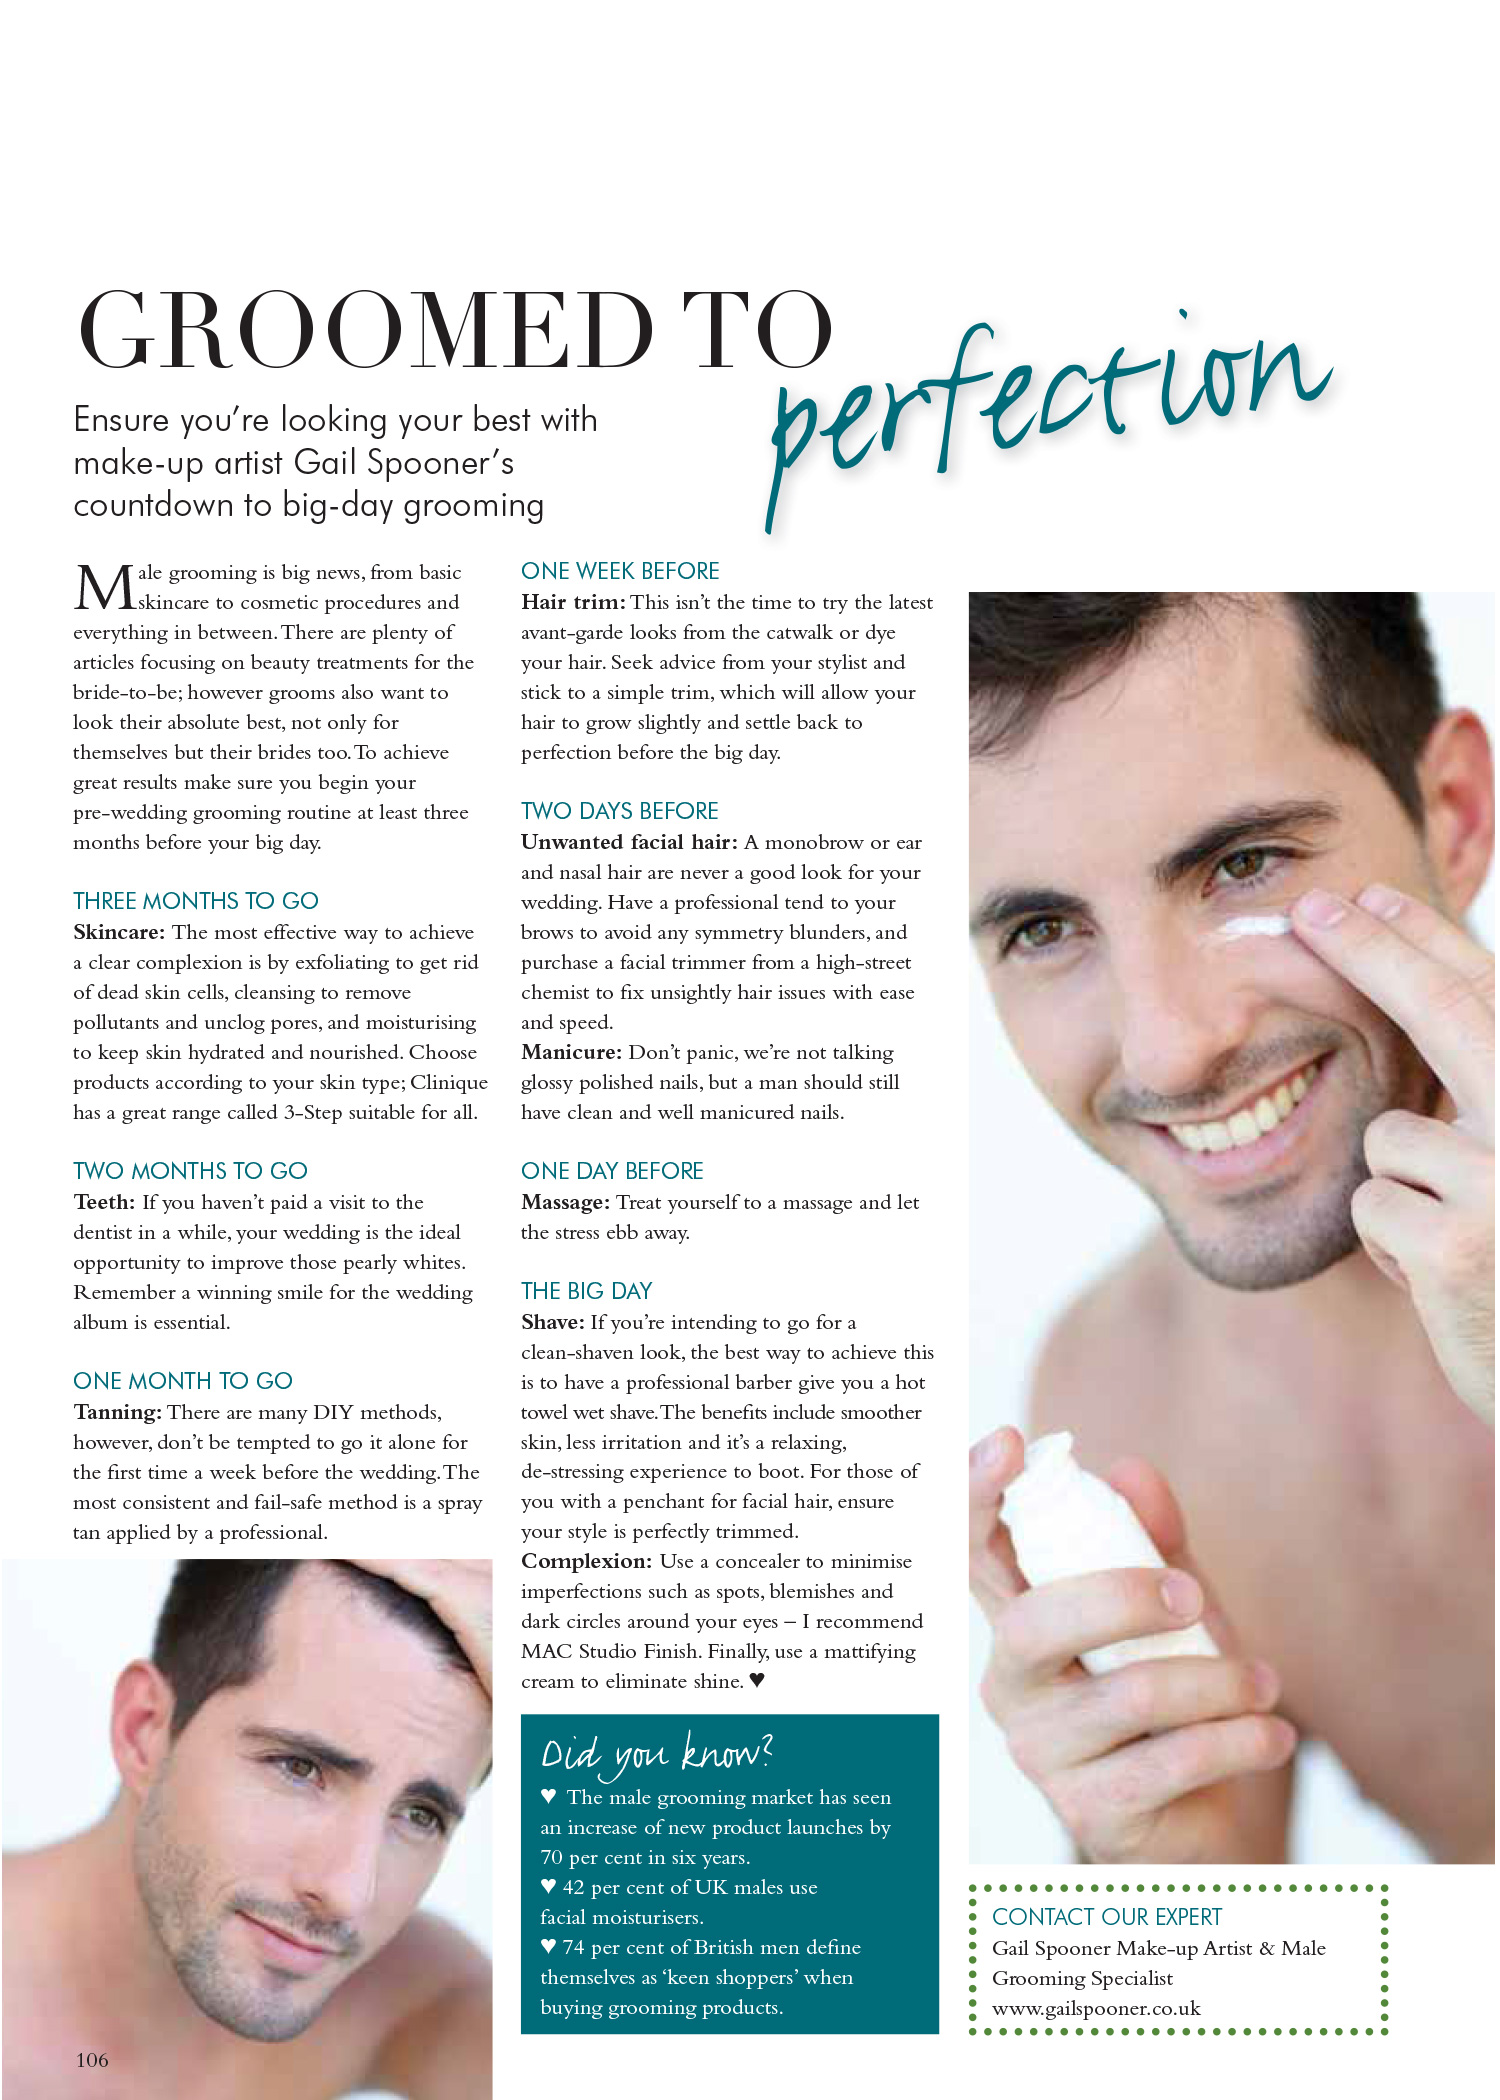 surrey wedding groomed to perfection page